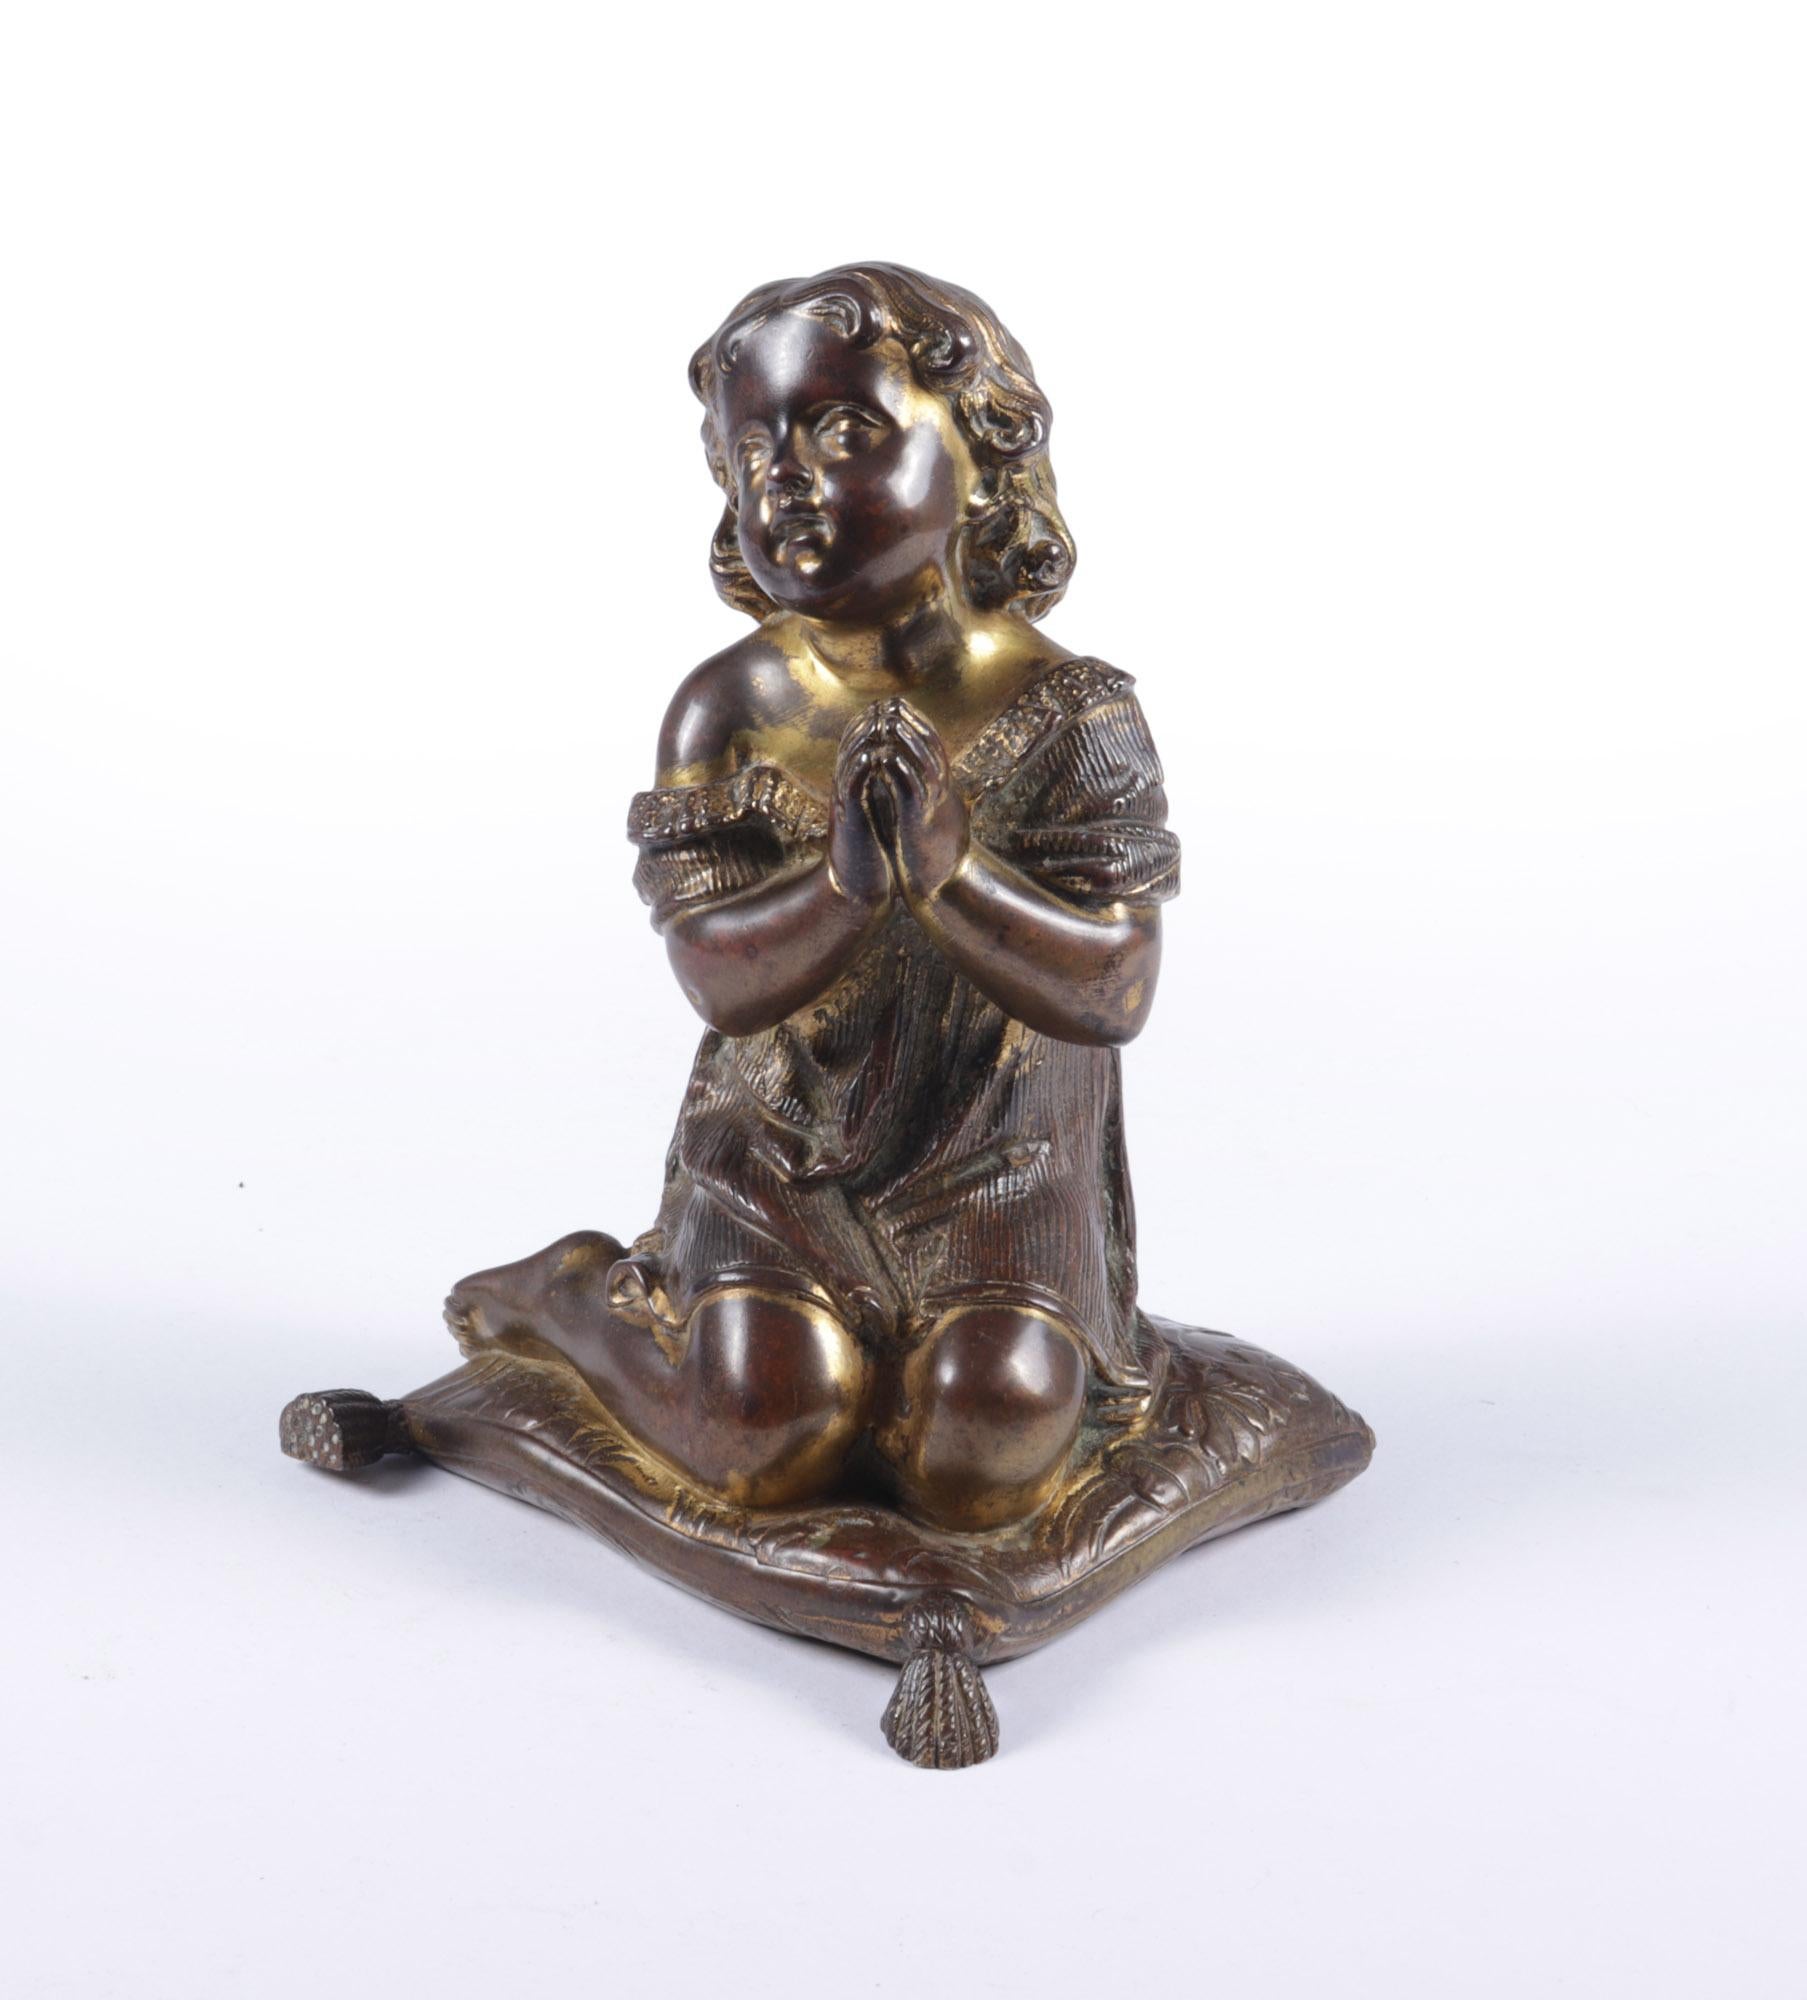 Italian gilt bronze cherub c1860
A small cherub praying on a cushion, cast around 1860 in Italy, then gilded with heavy wear to gilding but leaving a great patina to the bronze and gold, fantastic condition throughout

Age: 1860

Style: